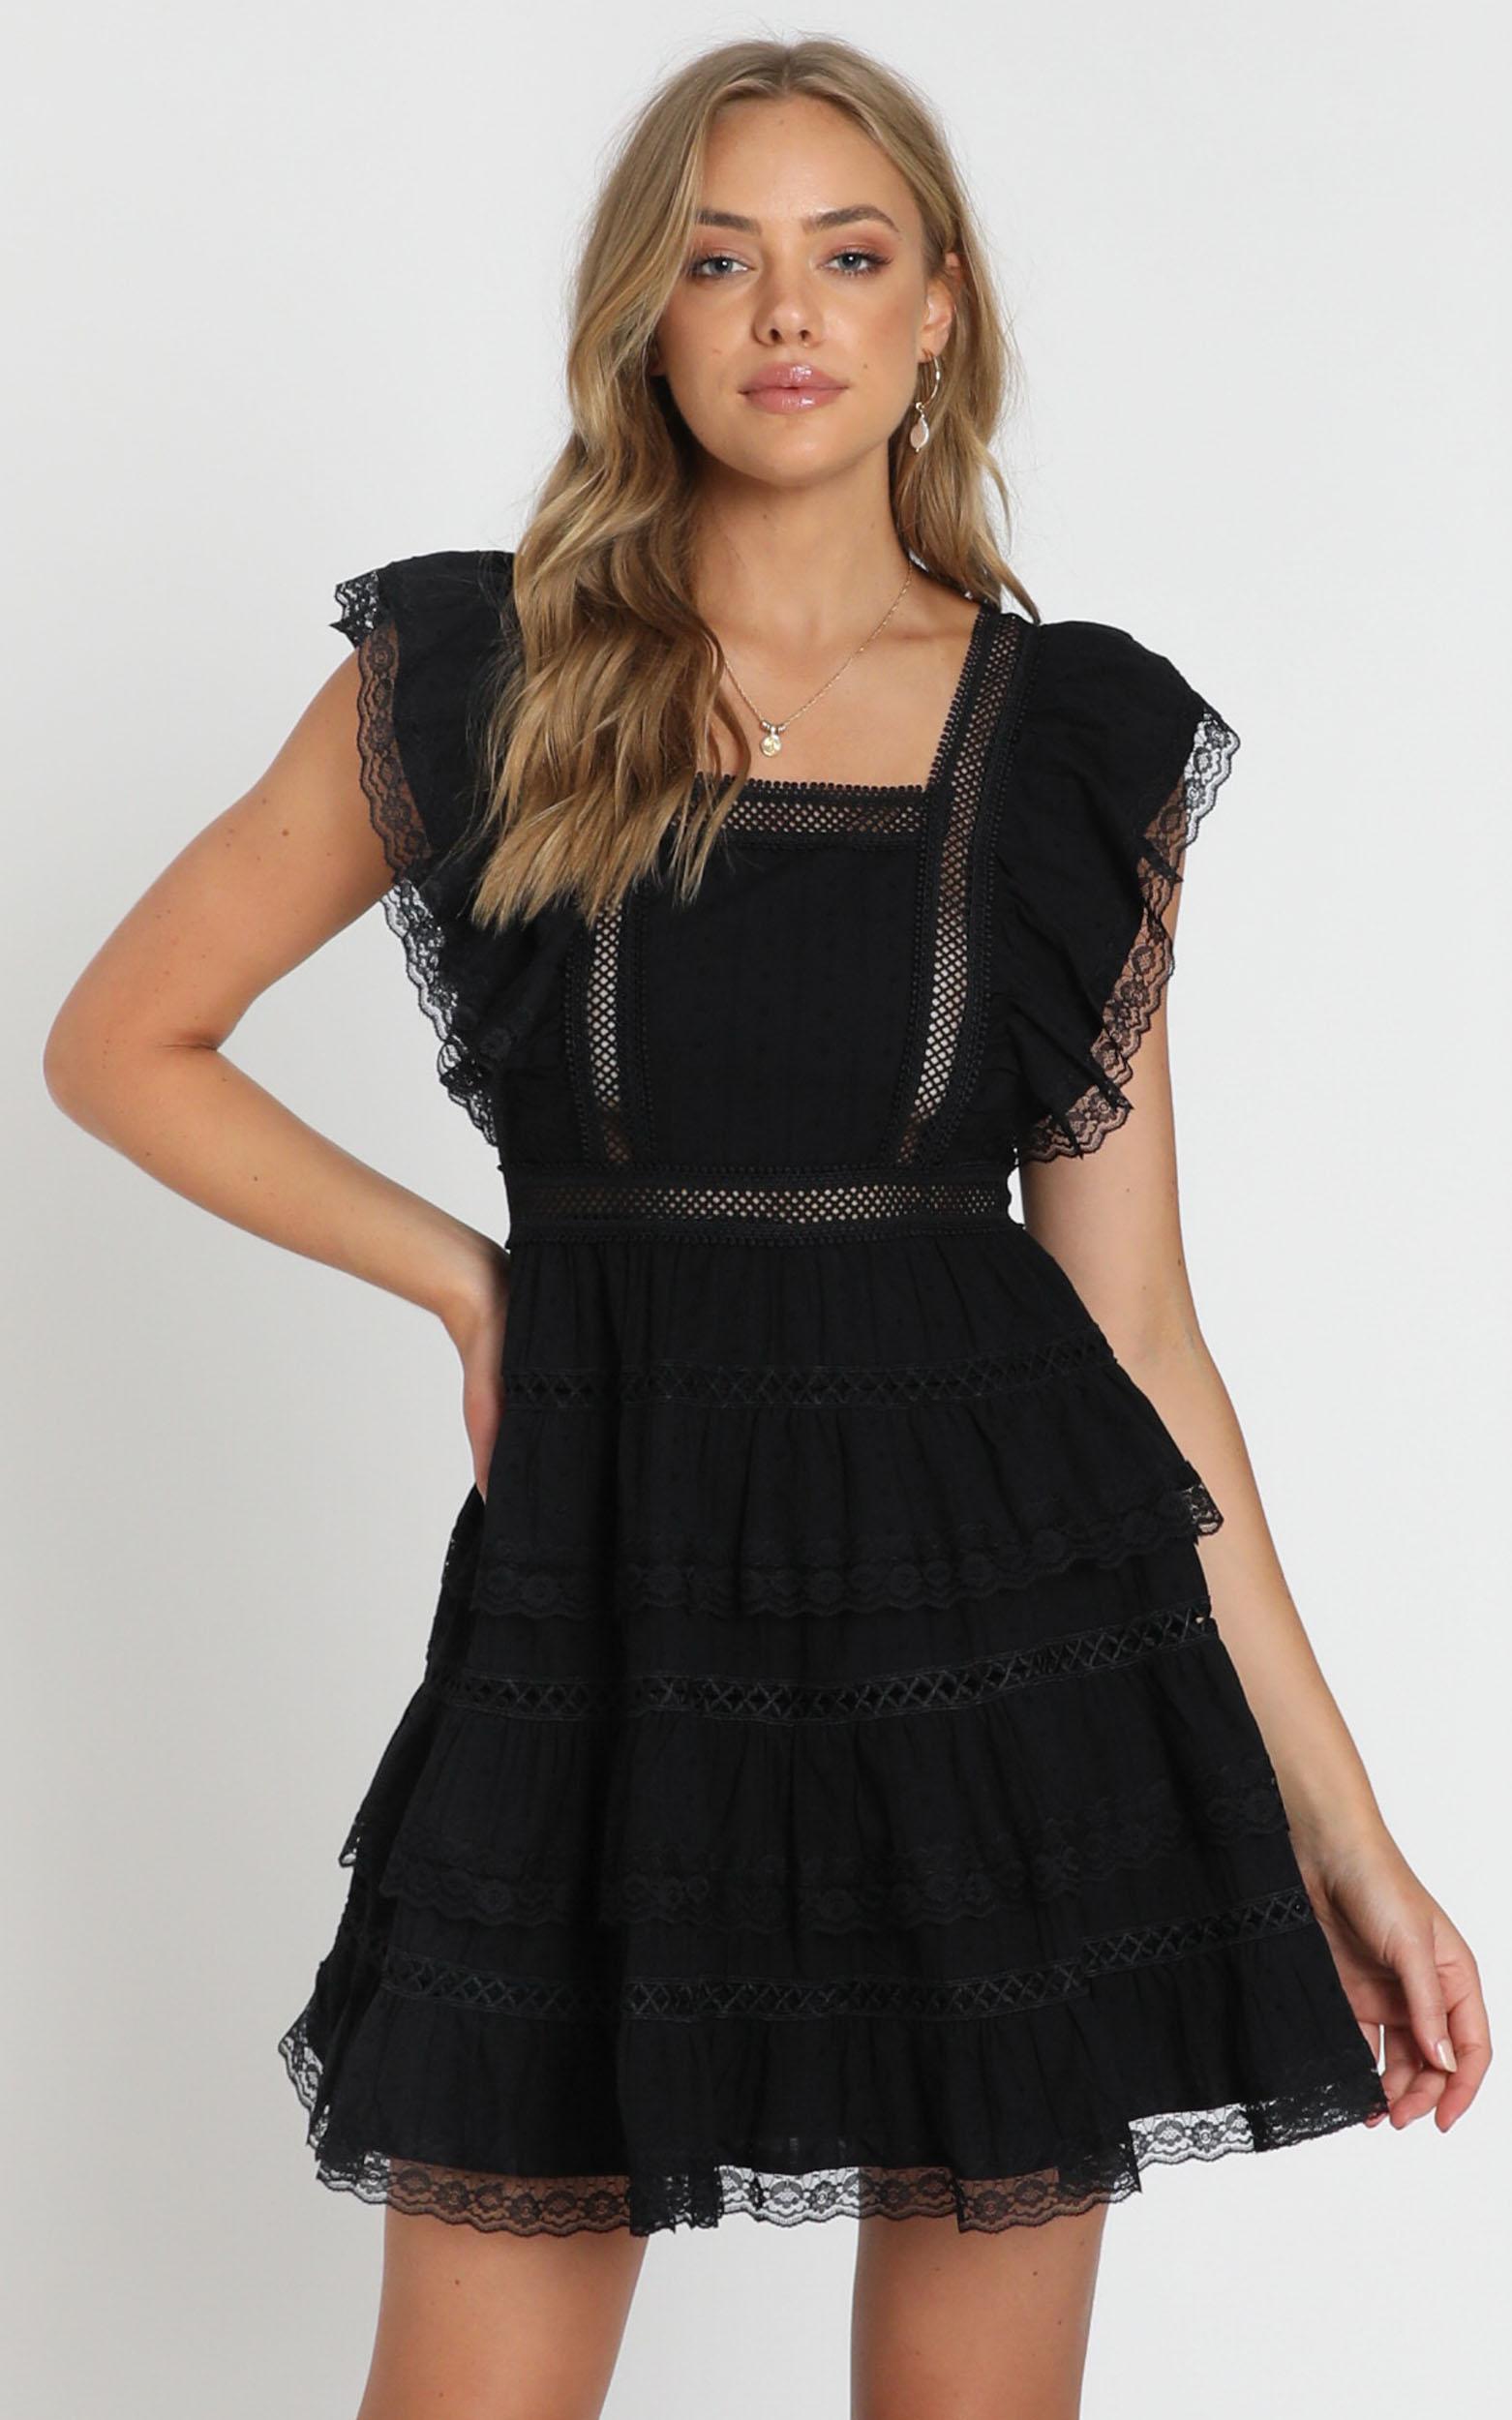 Dream For Days dress in black lace - 16 (XXL), Black, hi-res image number null